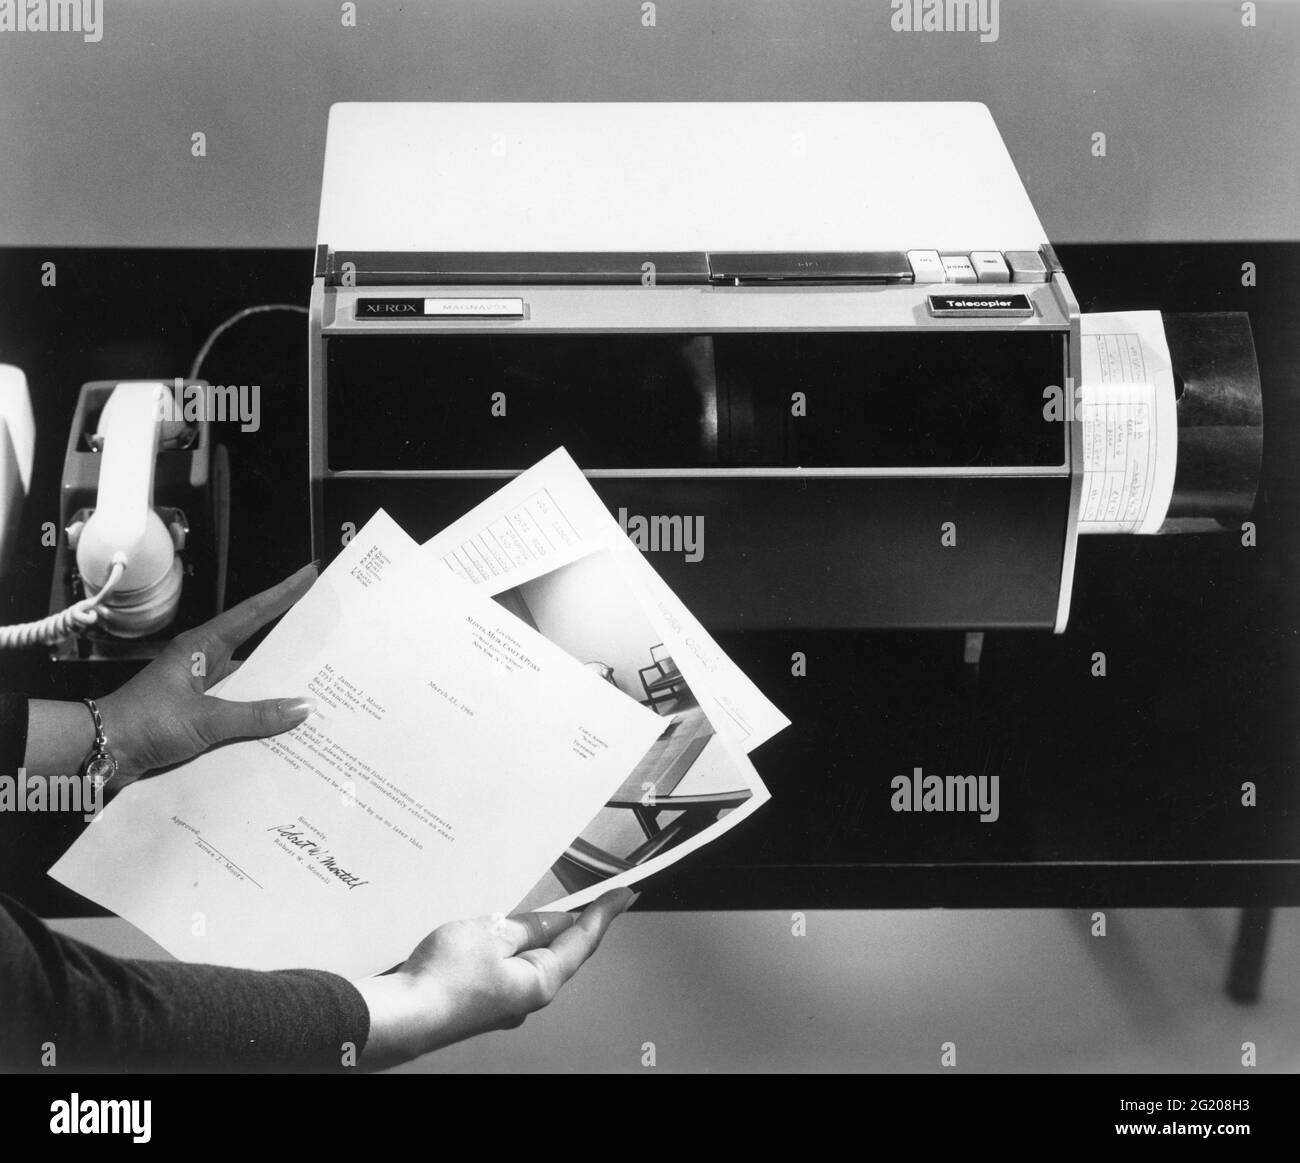 A new office machine - the Xerox Magnafax Telecopier - can look at a picture or letter and convert the image to sound over a telephone. At the other end on the receiving telephone, a similar machine reconverts the sound to a picture a few minutes later, Rochester, NY, 1966. (Xerox/RBM Vintage Images) Stock Photo